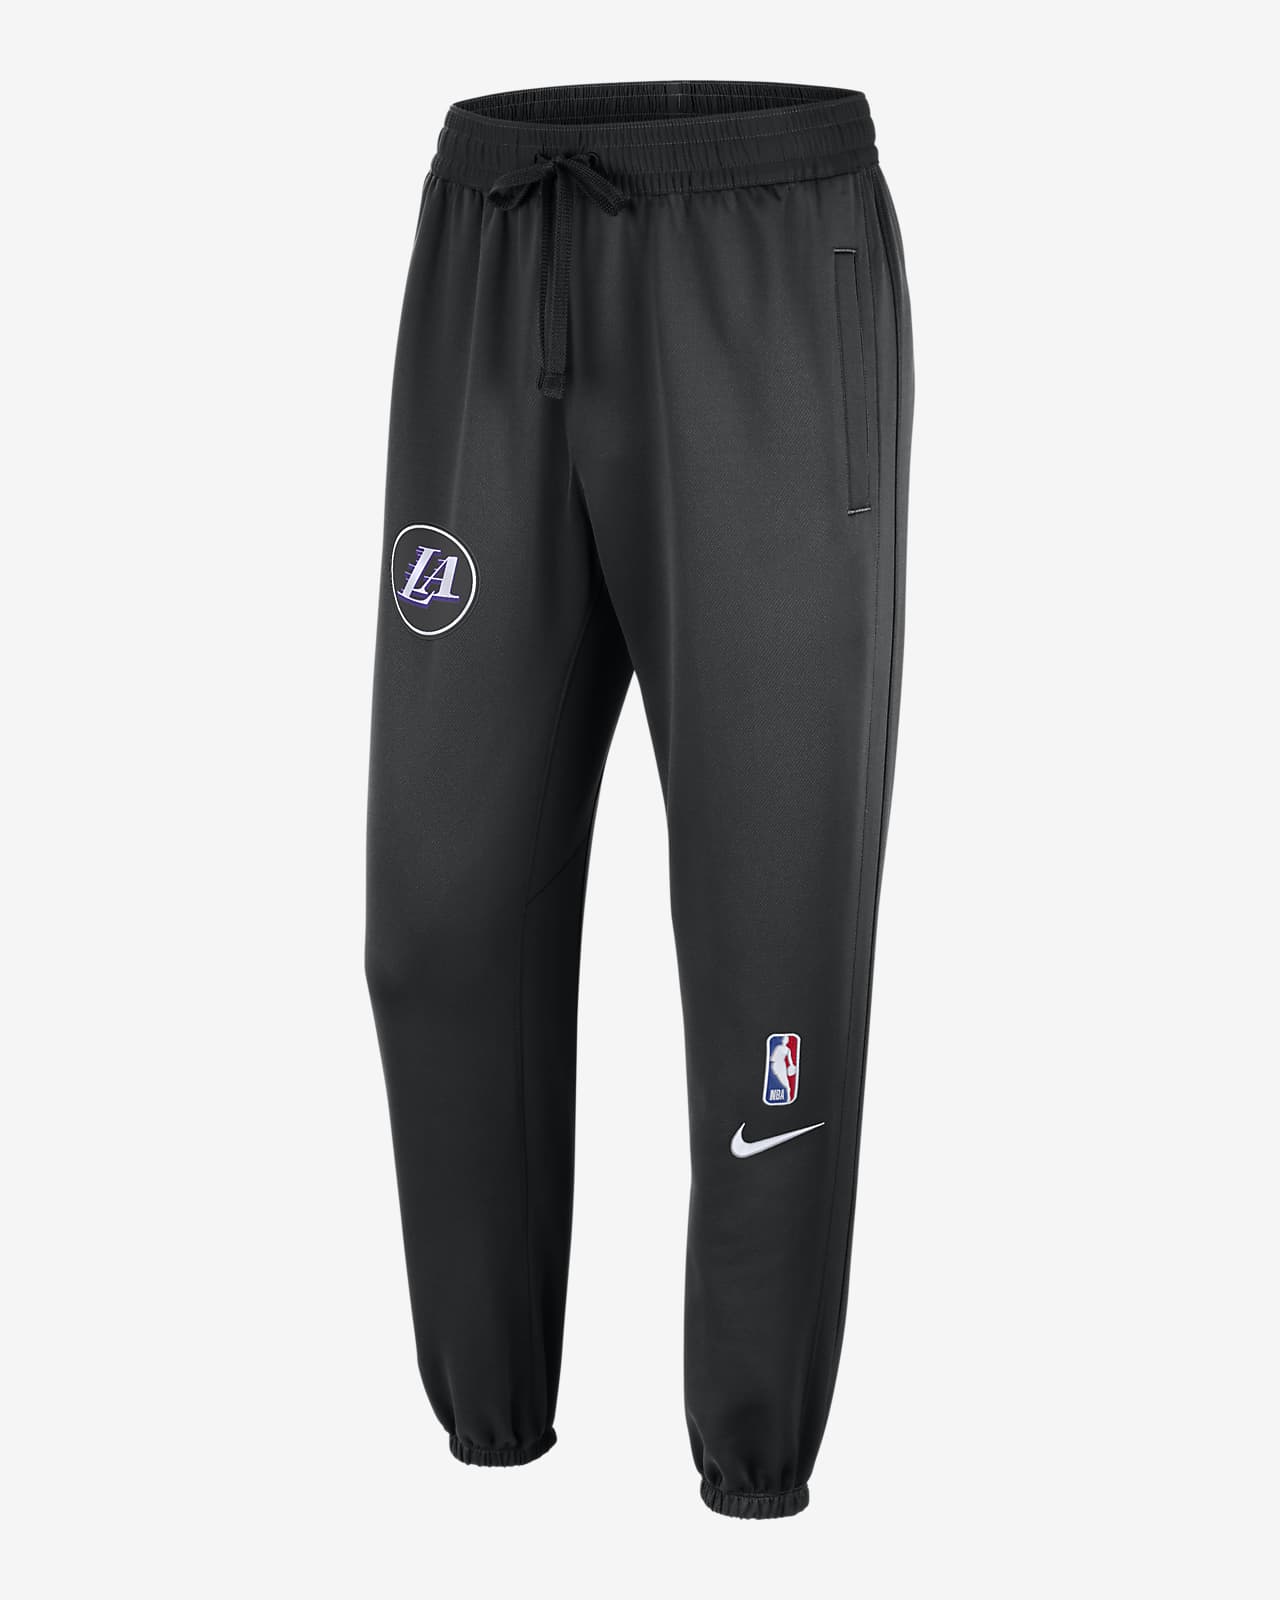 Nike Los Angeles Lakers Showtime City Edition Warm Up Pants Sz